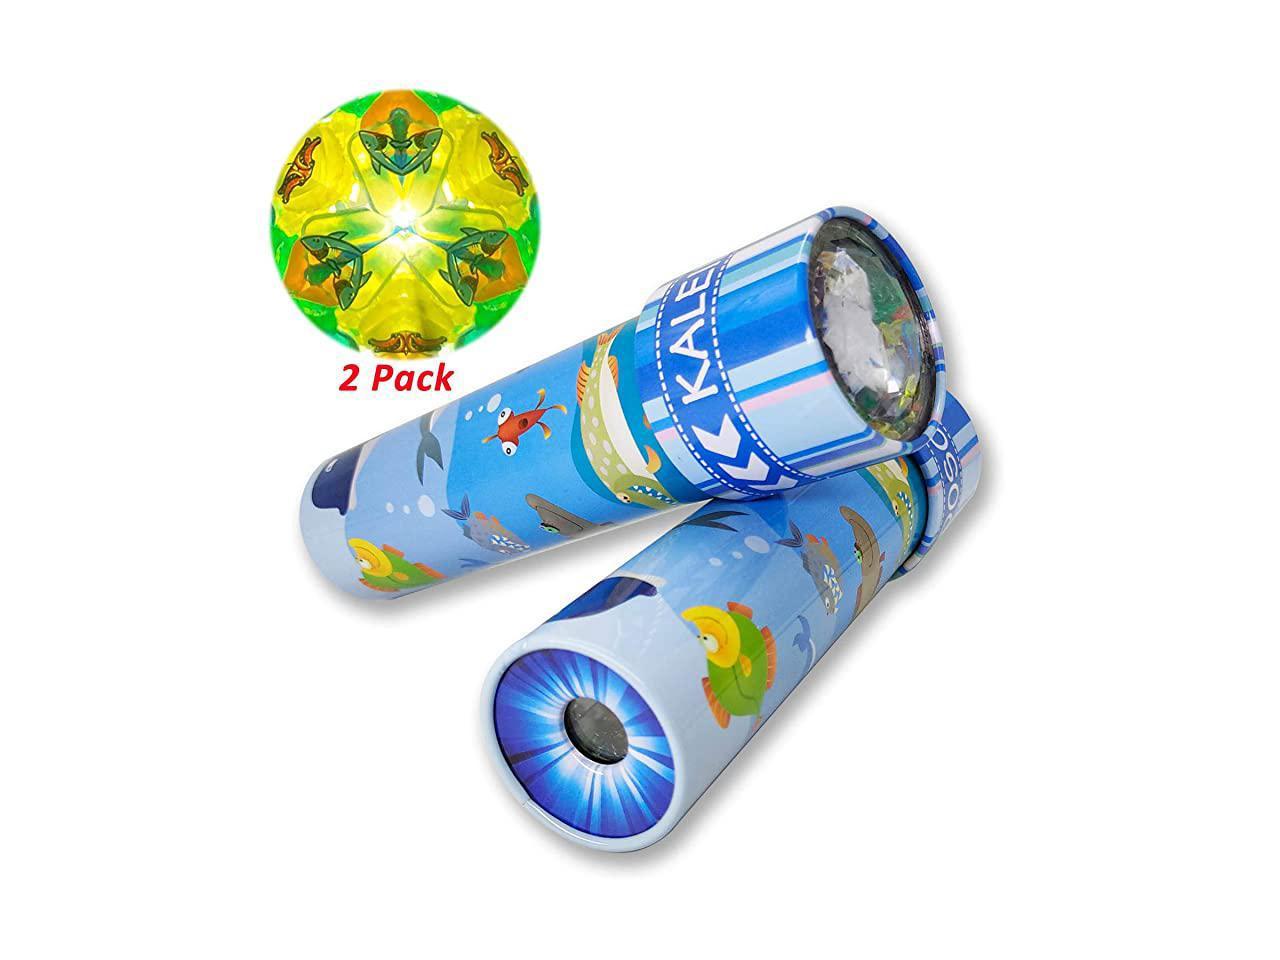 HEIGUDAN 2 Pack Classic Tin Kaleidoscope Handheld Ever-Changing Underwater World Kaleidoscopes for Kids Education Science Toy Gift for Boy Girl 